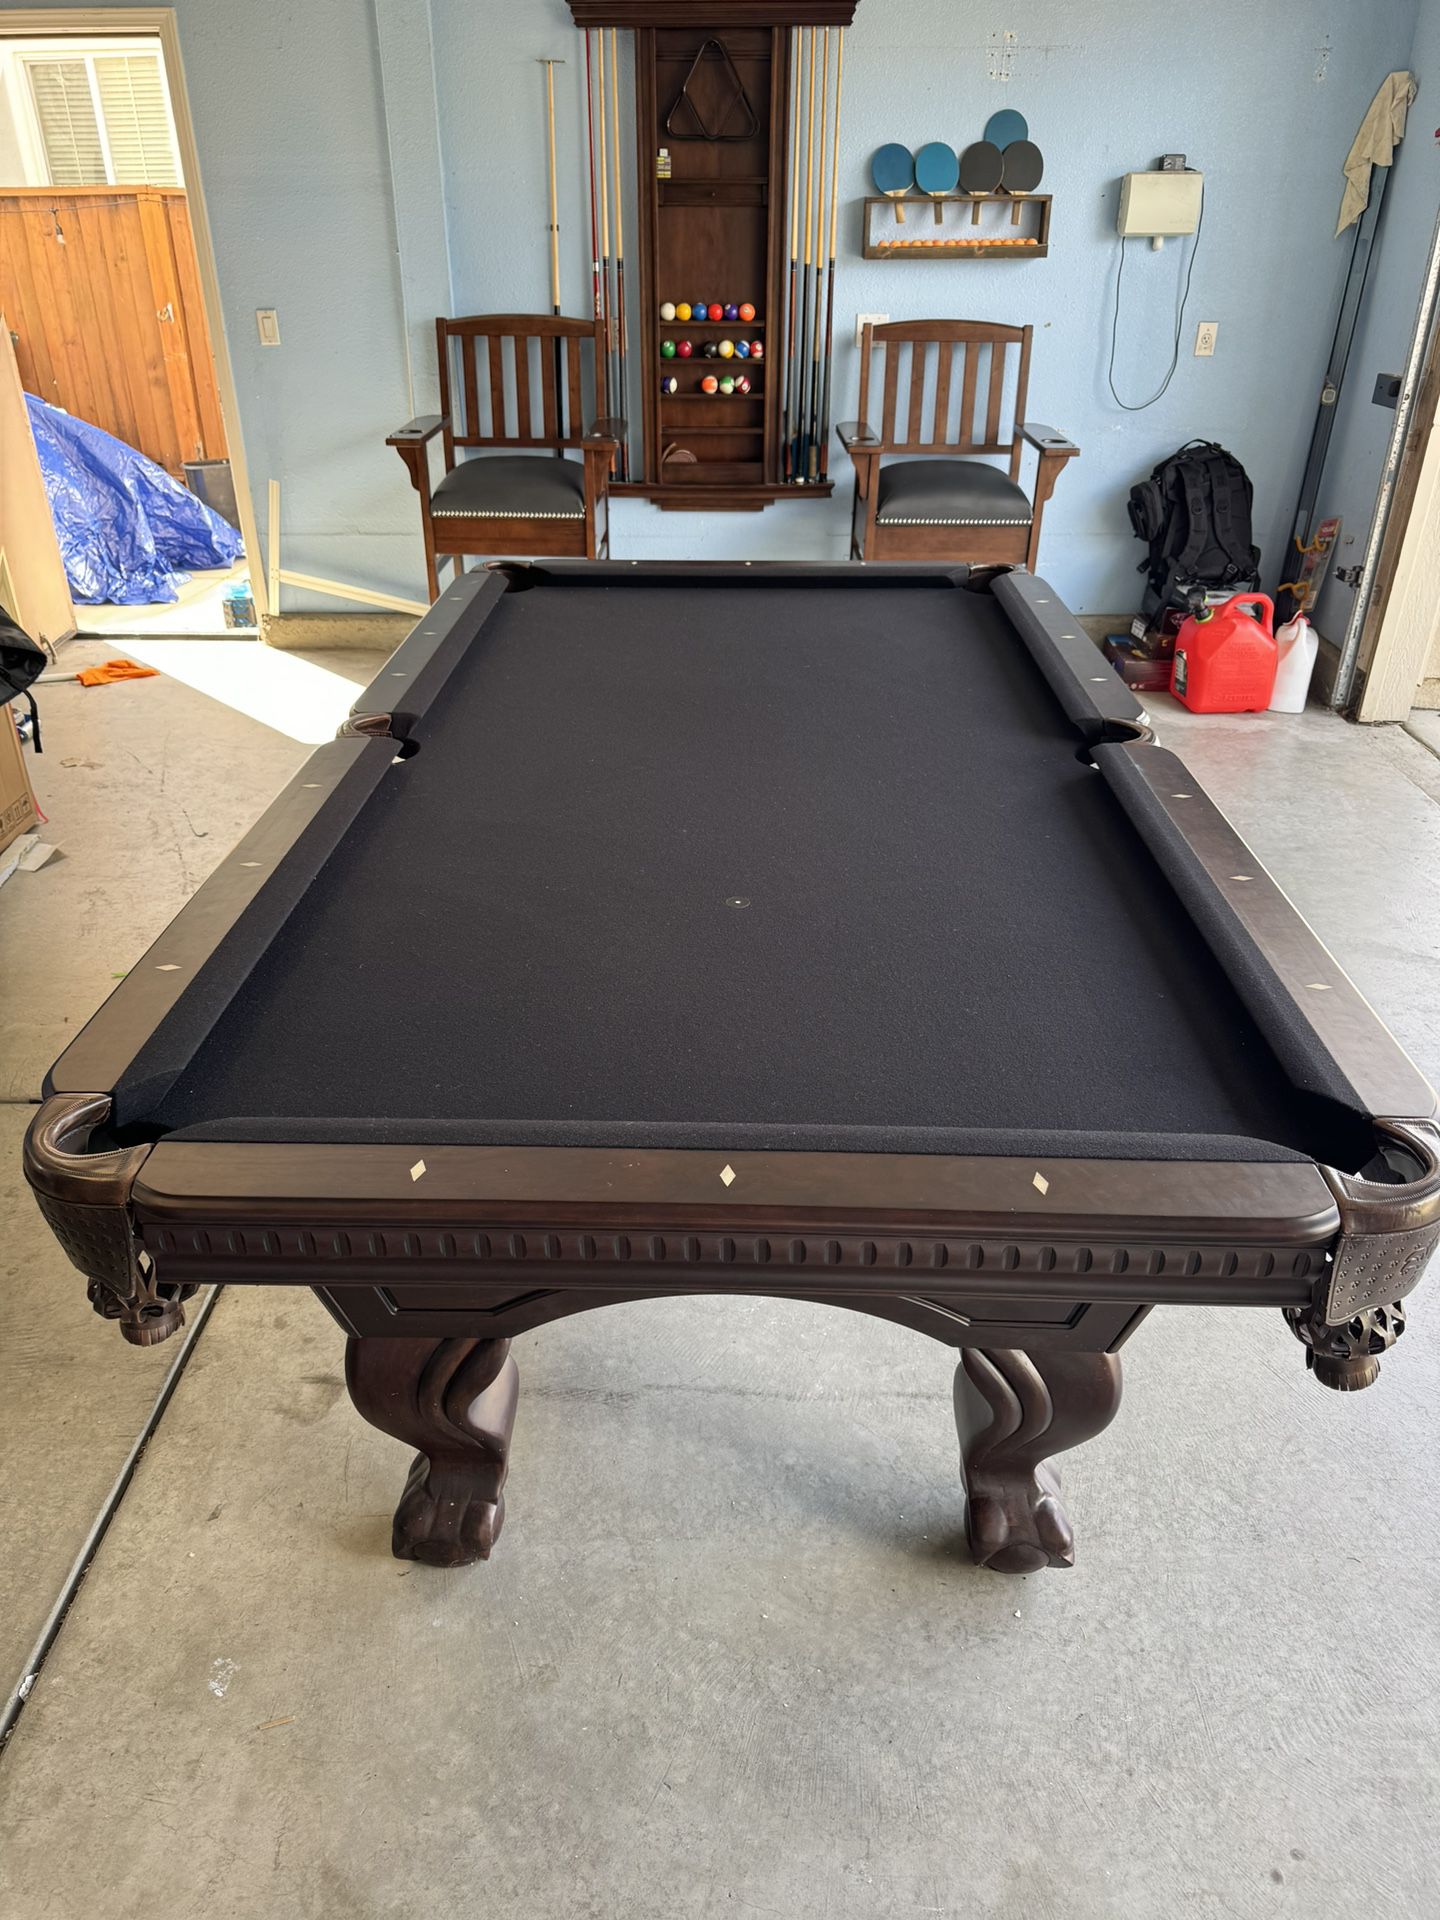 American Heritage Pool Table & Chairs